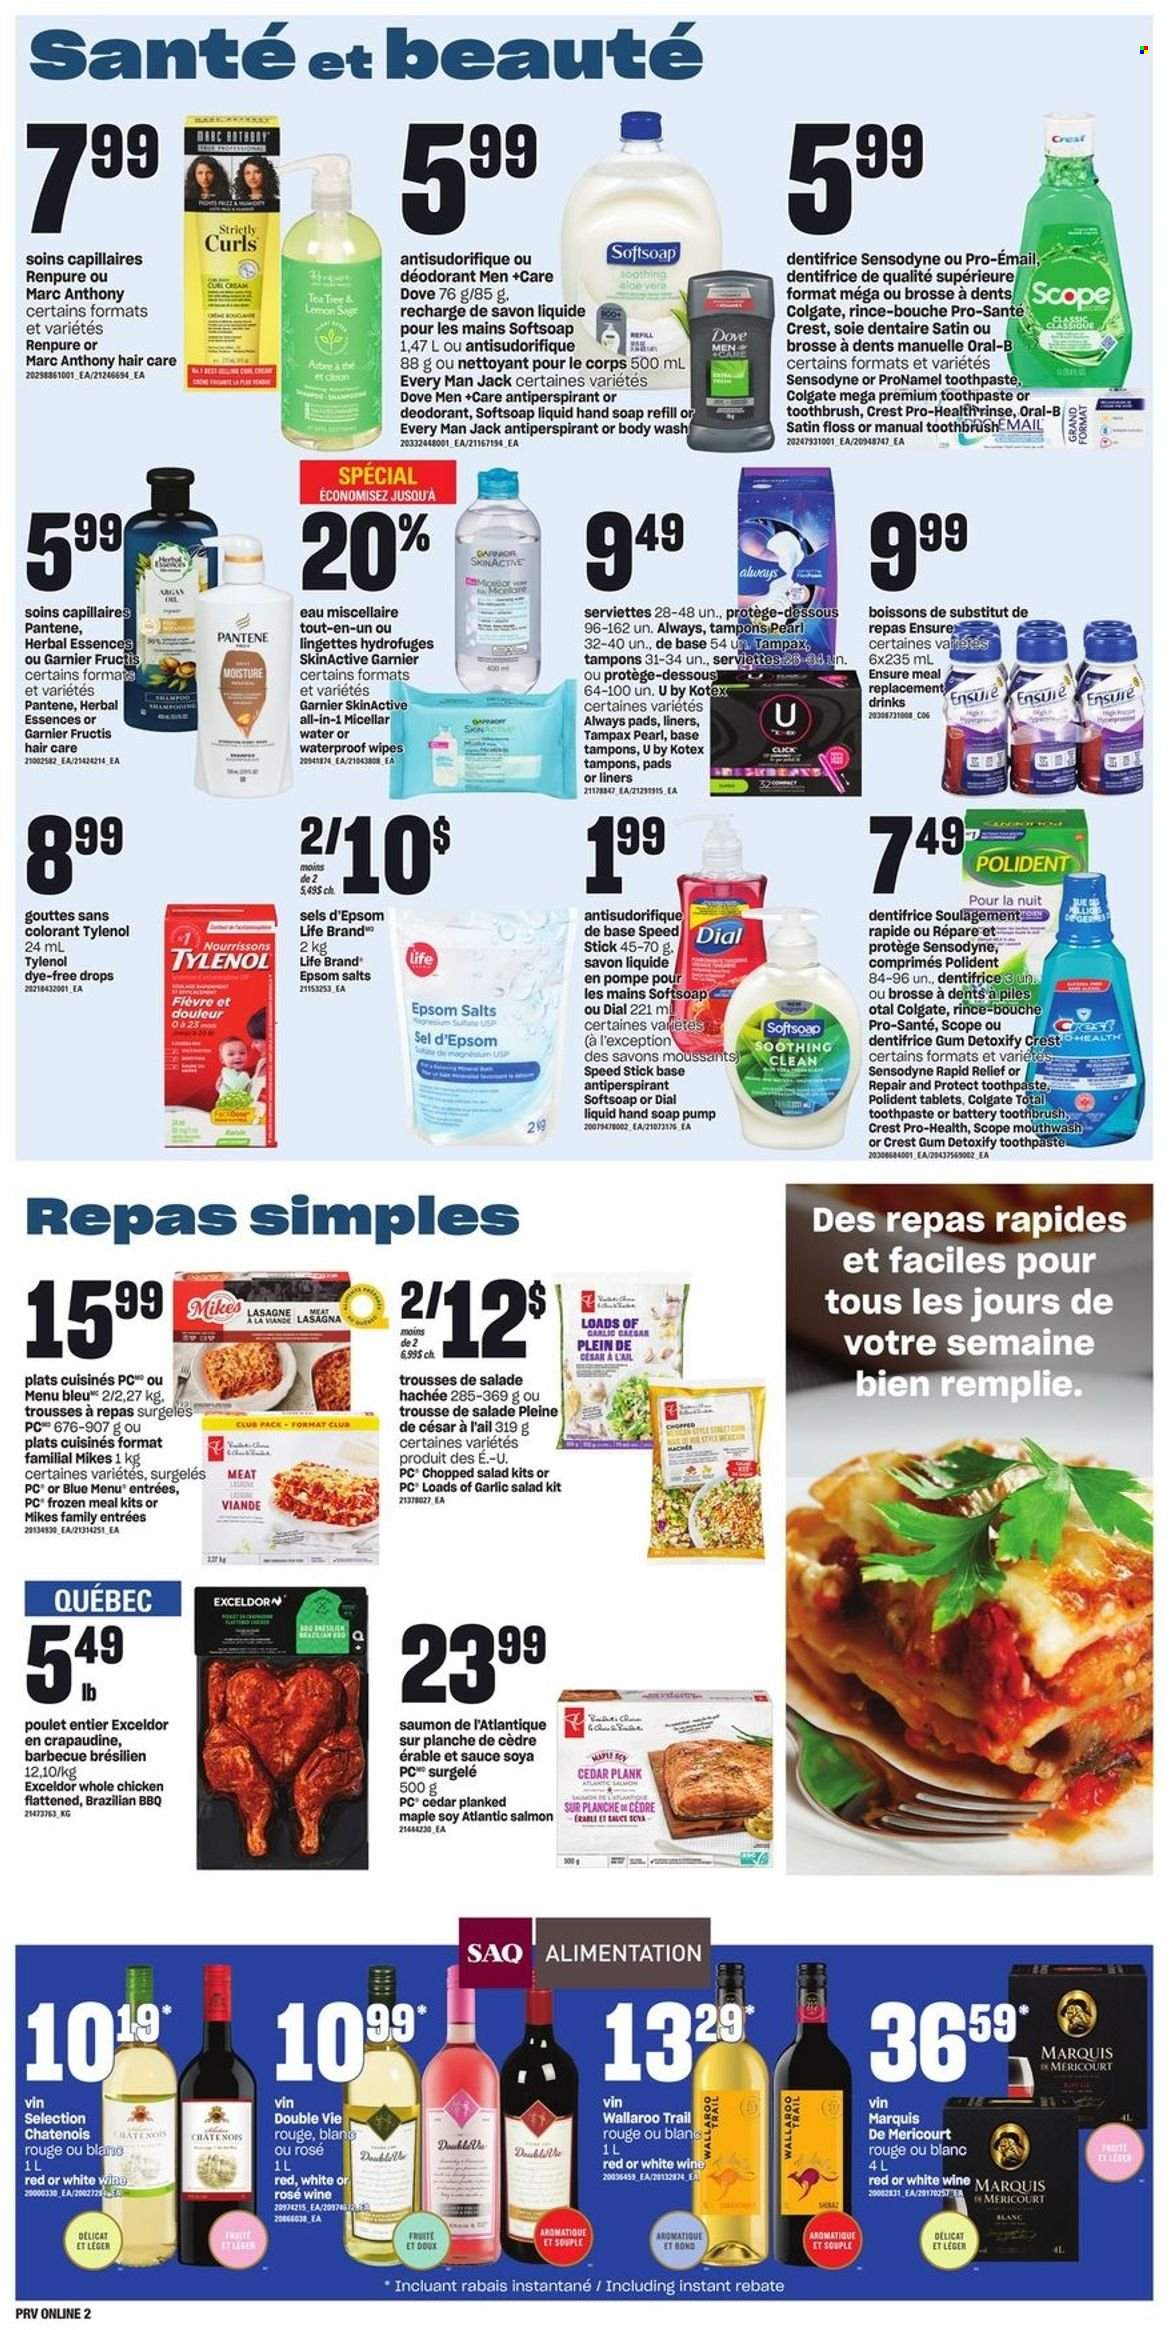 thumbnail - Provigo Flyer - February 09, 2023 - February 15, 2023 - Sales products - garlic, salad, chopped salad, salmon, sauce, lasagna meal, Dove, tea, rosé wine, whole chicken, chicken, wipes, body wash, Softsoap, hand soap, Dial, soap, toothbrush, toothpaste, mouthwash, Polident, Crest, Always pads, sanitary pads, Kotex, tampons, micellar water, Pantene, Herbal Essences, Fructis, anti-perspirant, Speed Stick, magnesium, Tylenol, Colgate, Garnier, shampoo, Tampax, Oral-B, Sensodyne, deodorant. Page 13.